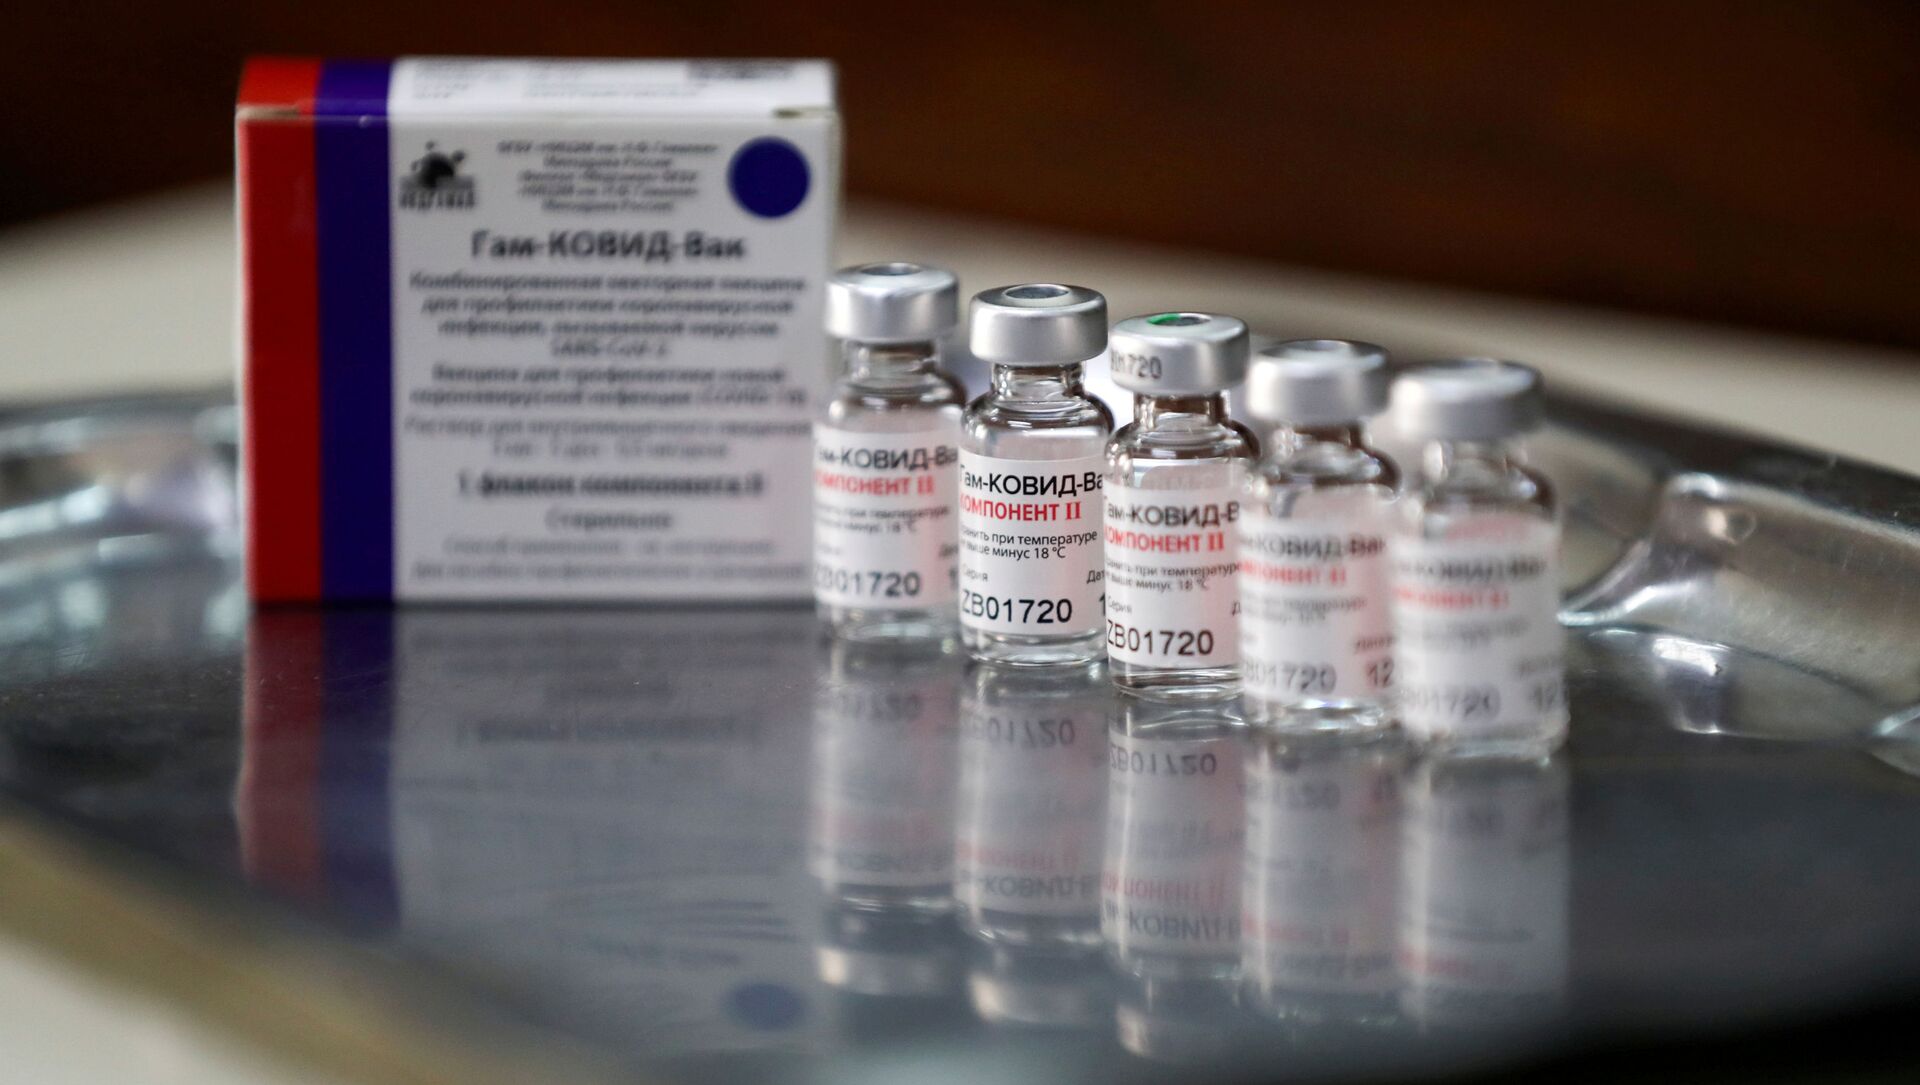 Empty vials of the second dose of the Sputnik V (Gam-COVID-Vac) vaccine are pictured at the San Martin hospital, in La Plata, on the outskirts of Buenos Aires, Argentina January 21, 2021. - Sputnik International, 1920, 15.03.2021